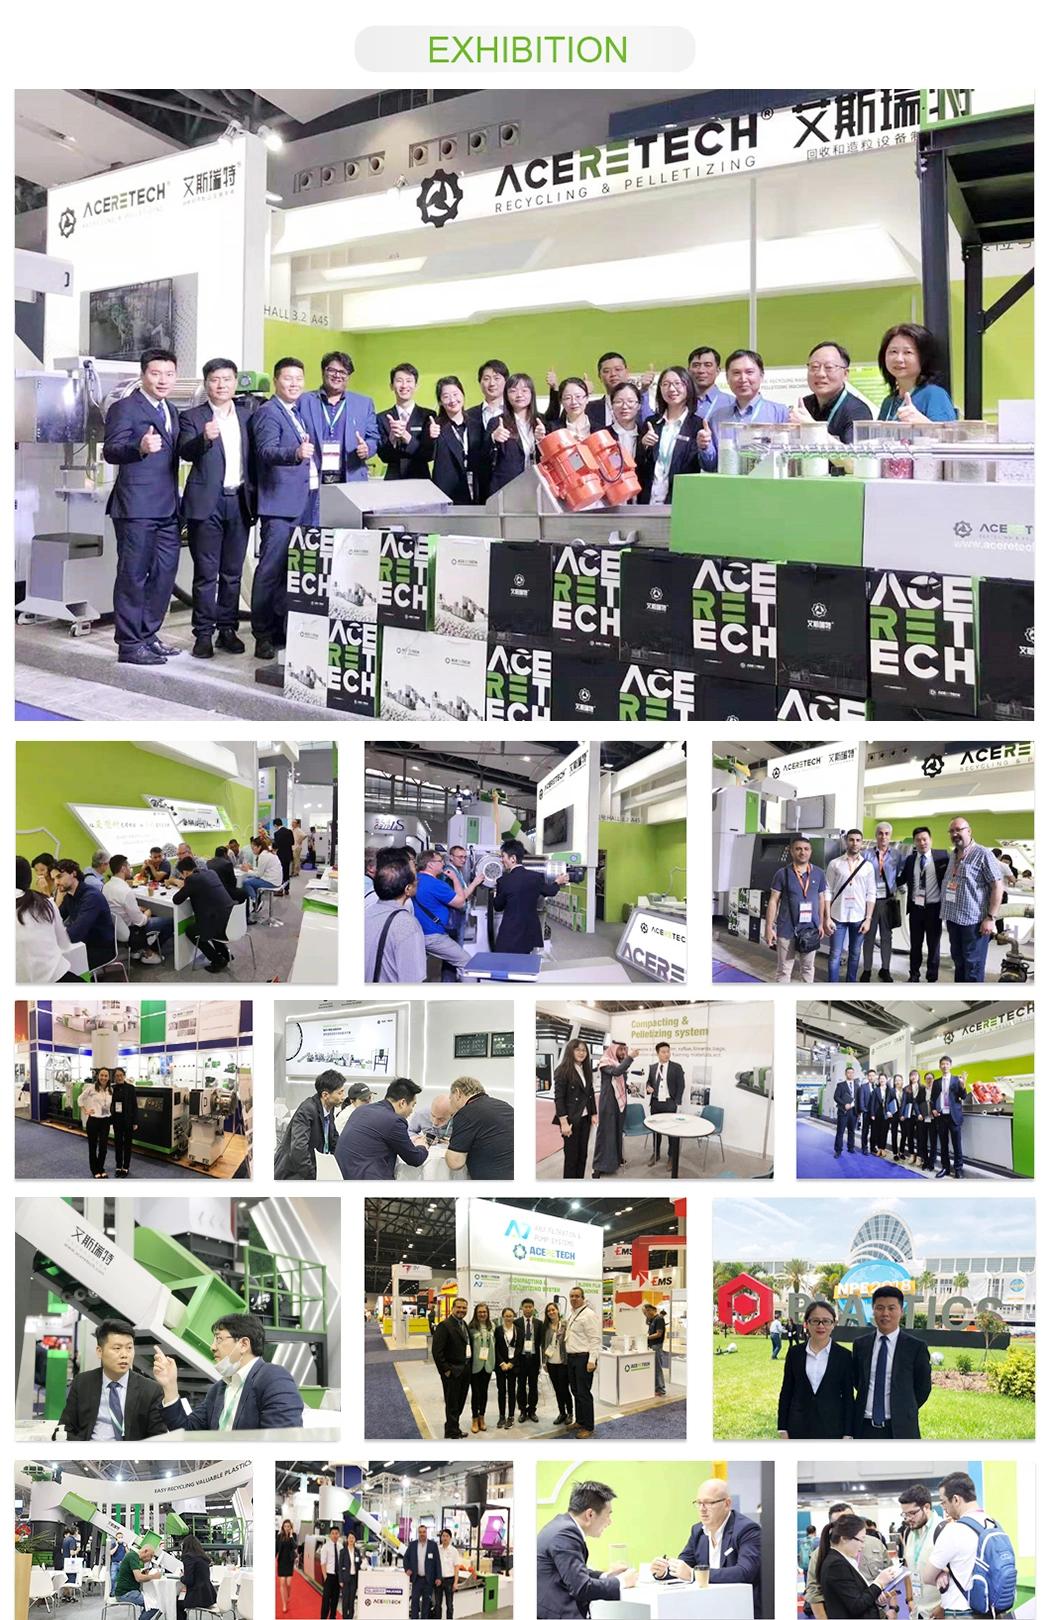 Aceretech Made in China Plastic Recycling Machine for Sale